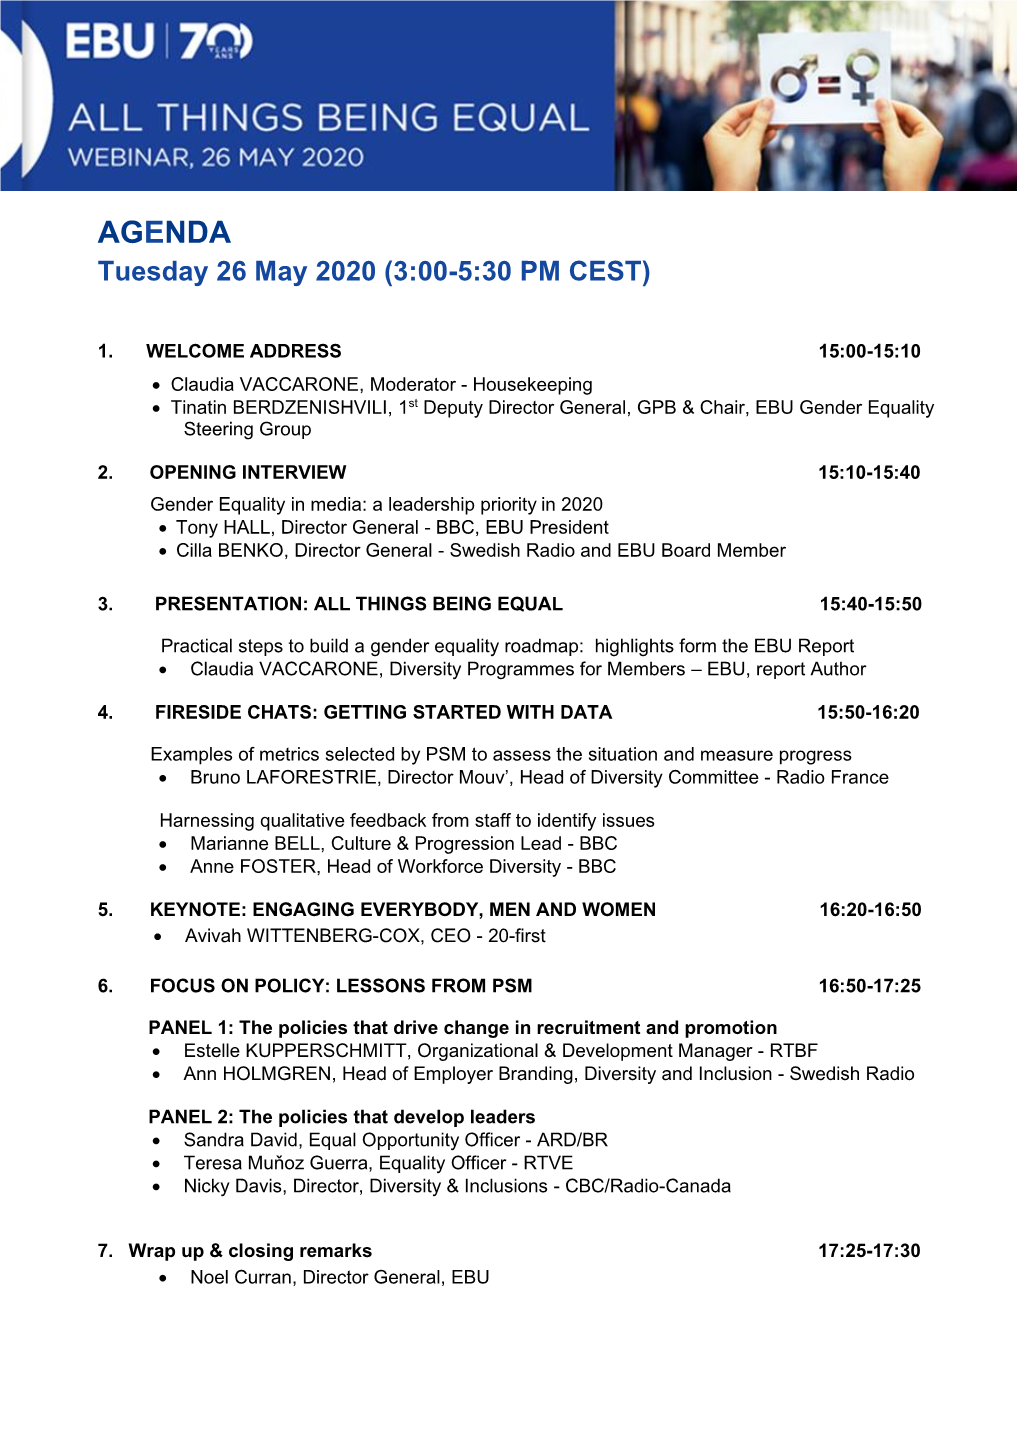 AGENDA Tuesday 26 May 2020 (3:00-5:30 PM CEST)